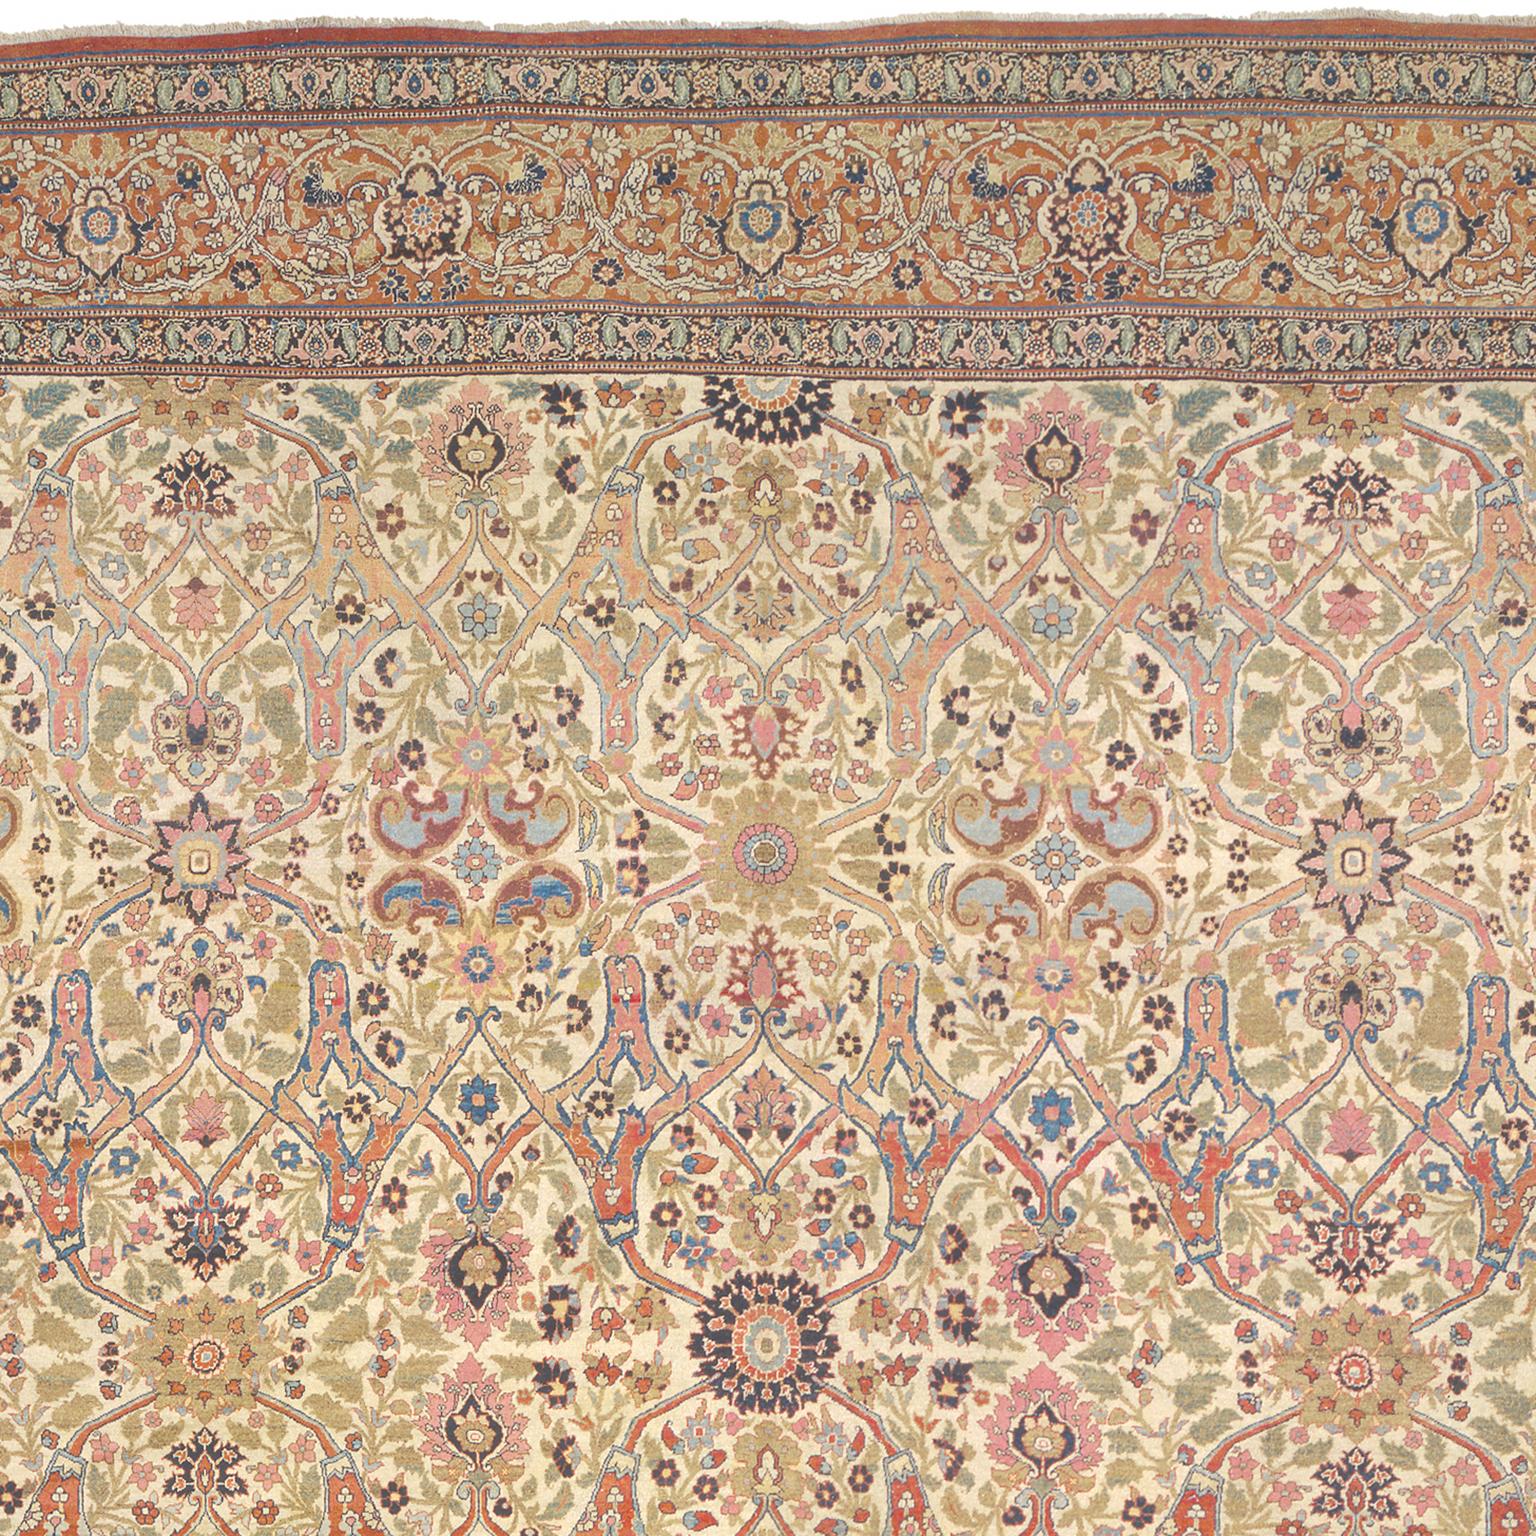 Late 19th Century Persian Tabriz Rug In Good Condition For Sale In New York, NY